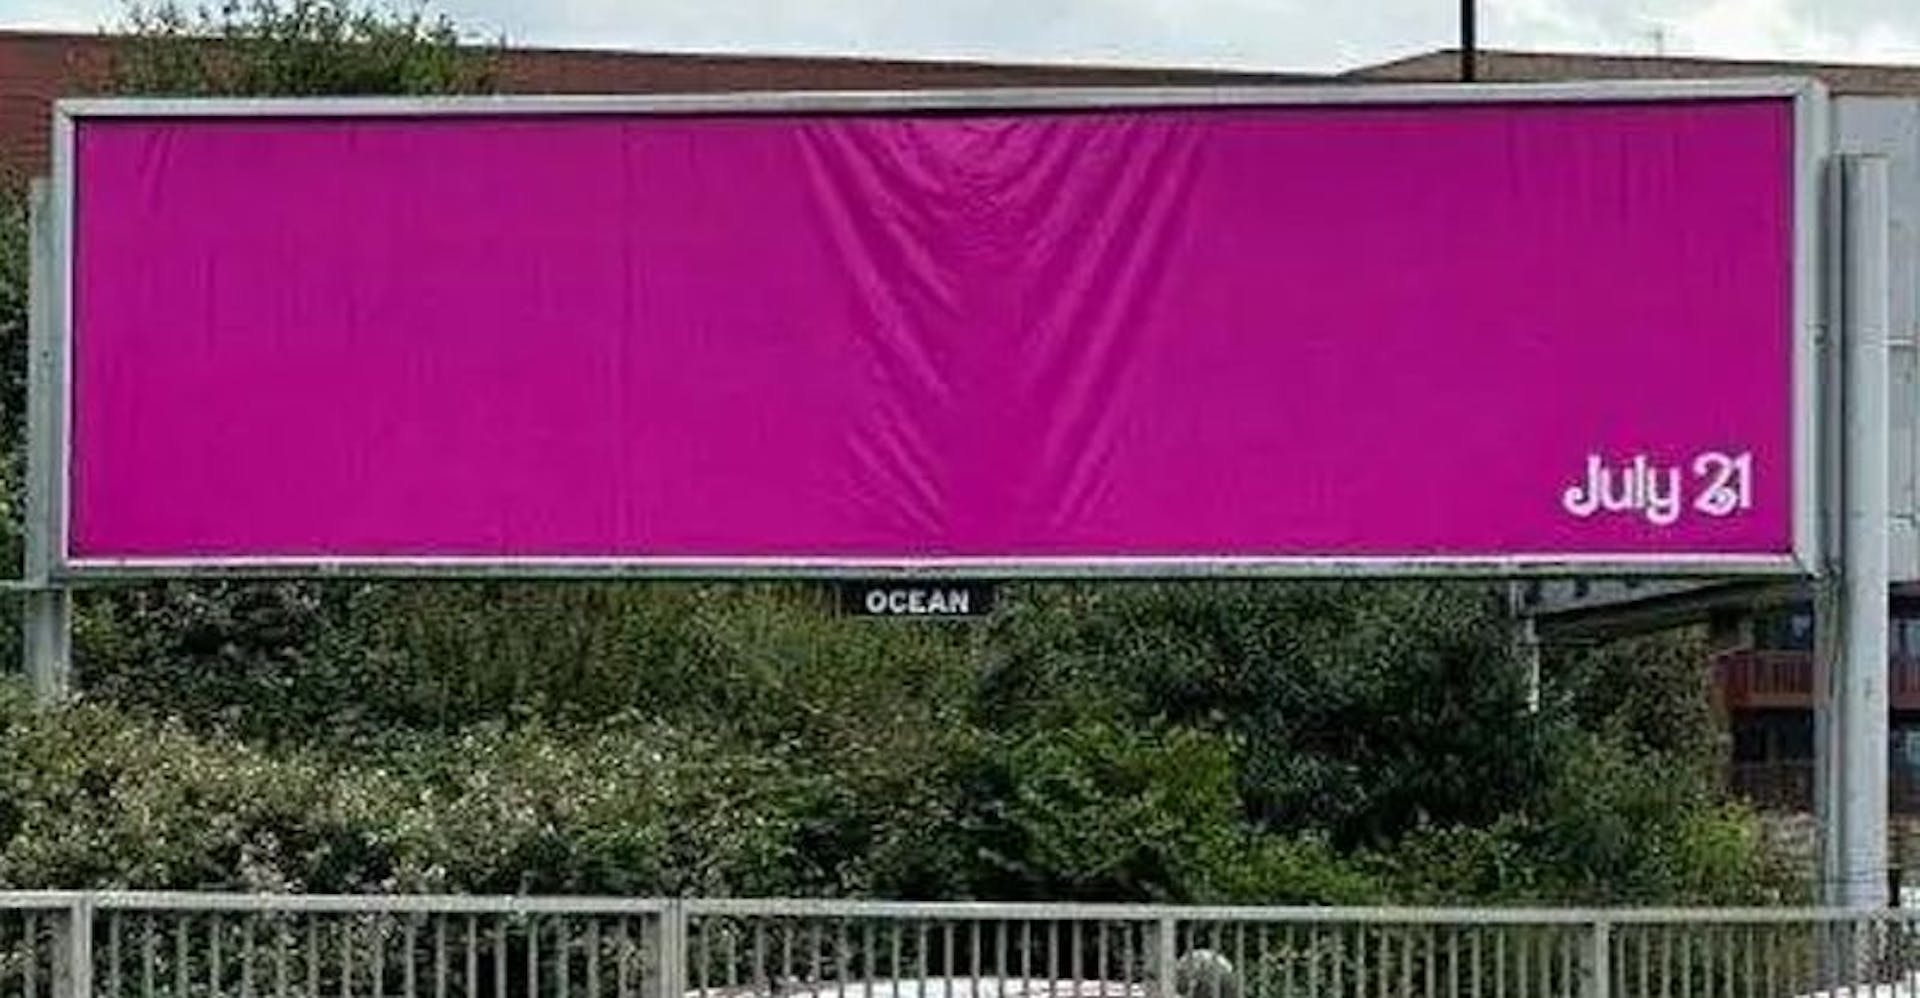 Minimalist approach used in a variety o billboards.